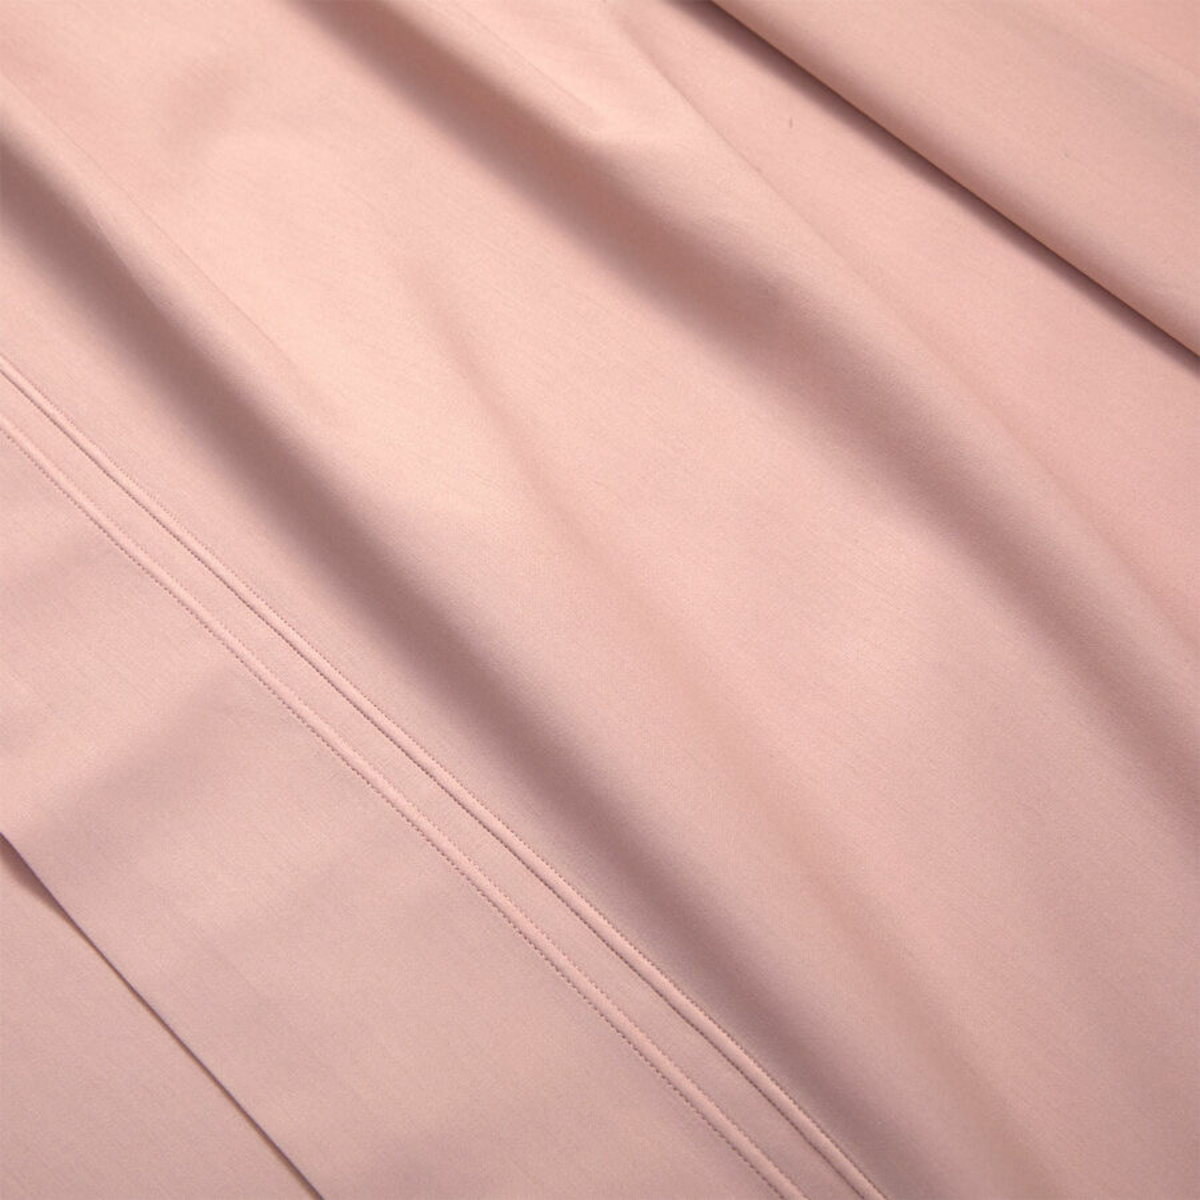 Fabric Detail of Yves Delorme Triomphe Bedding in Poudre Color